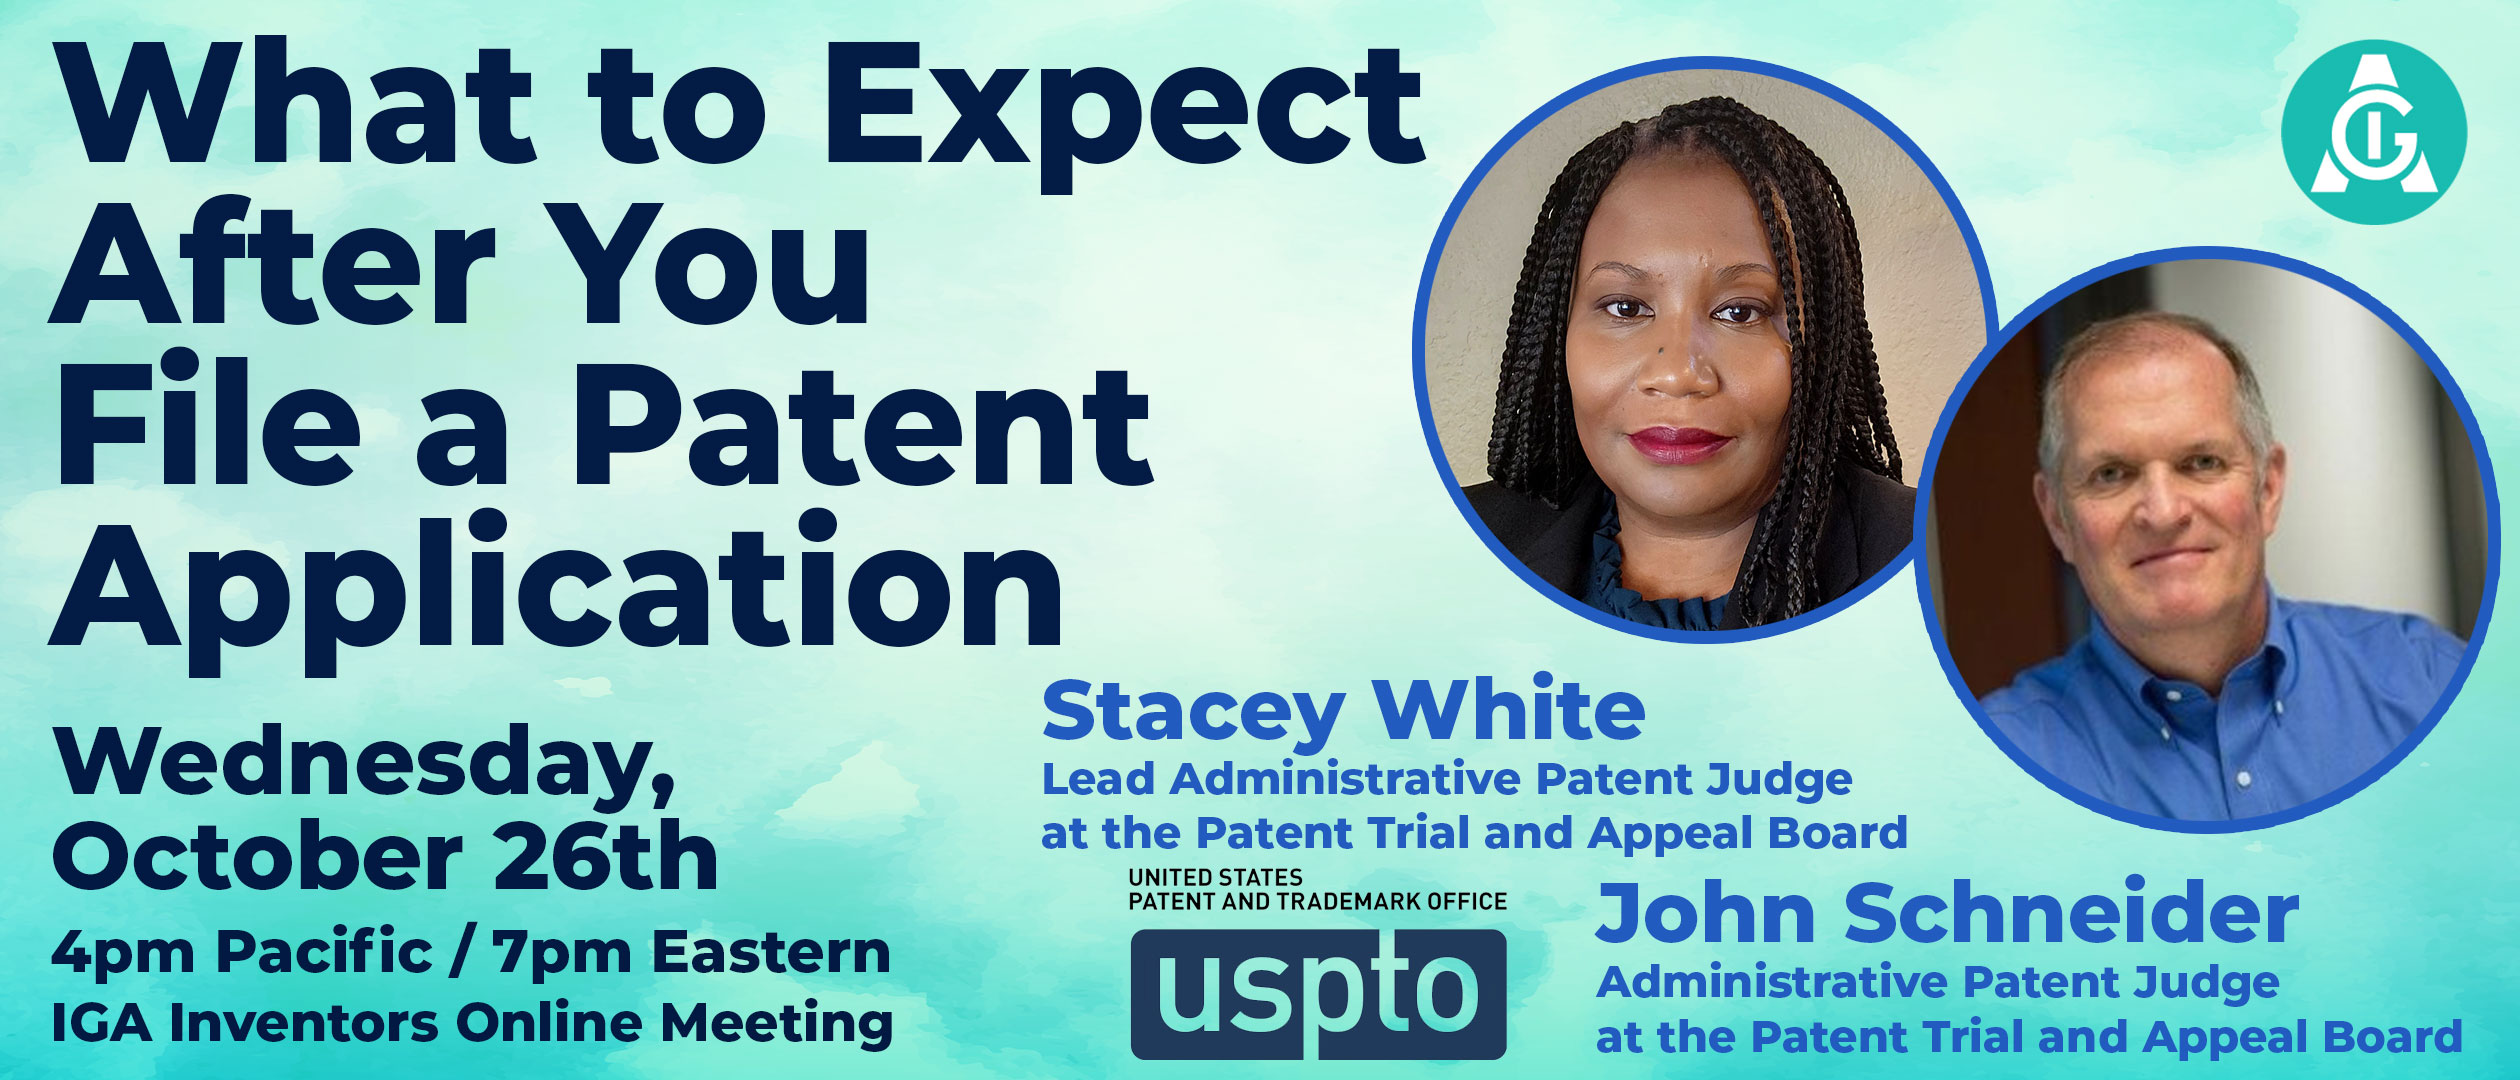 <h3><strong>What to Expect After You File a Patent Application</h3></strong>